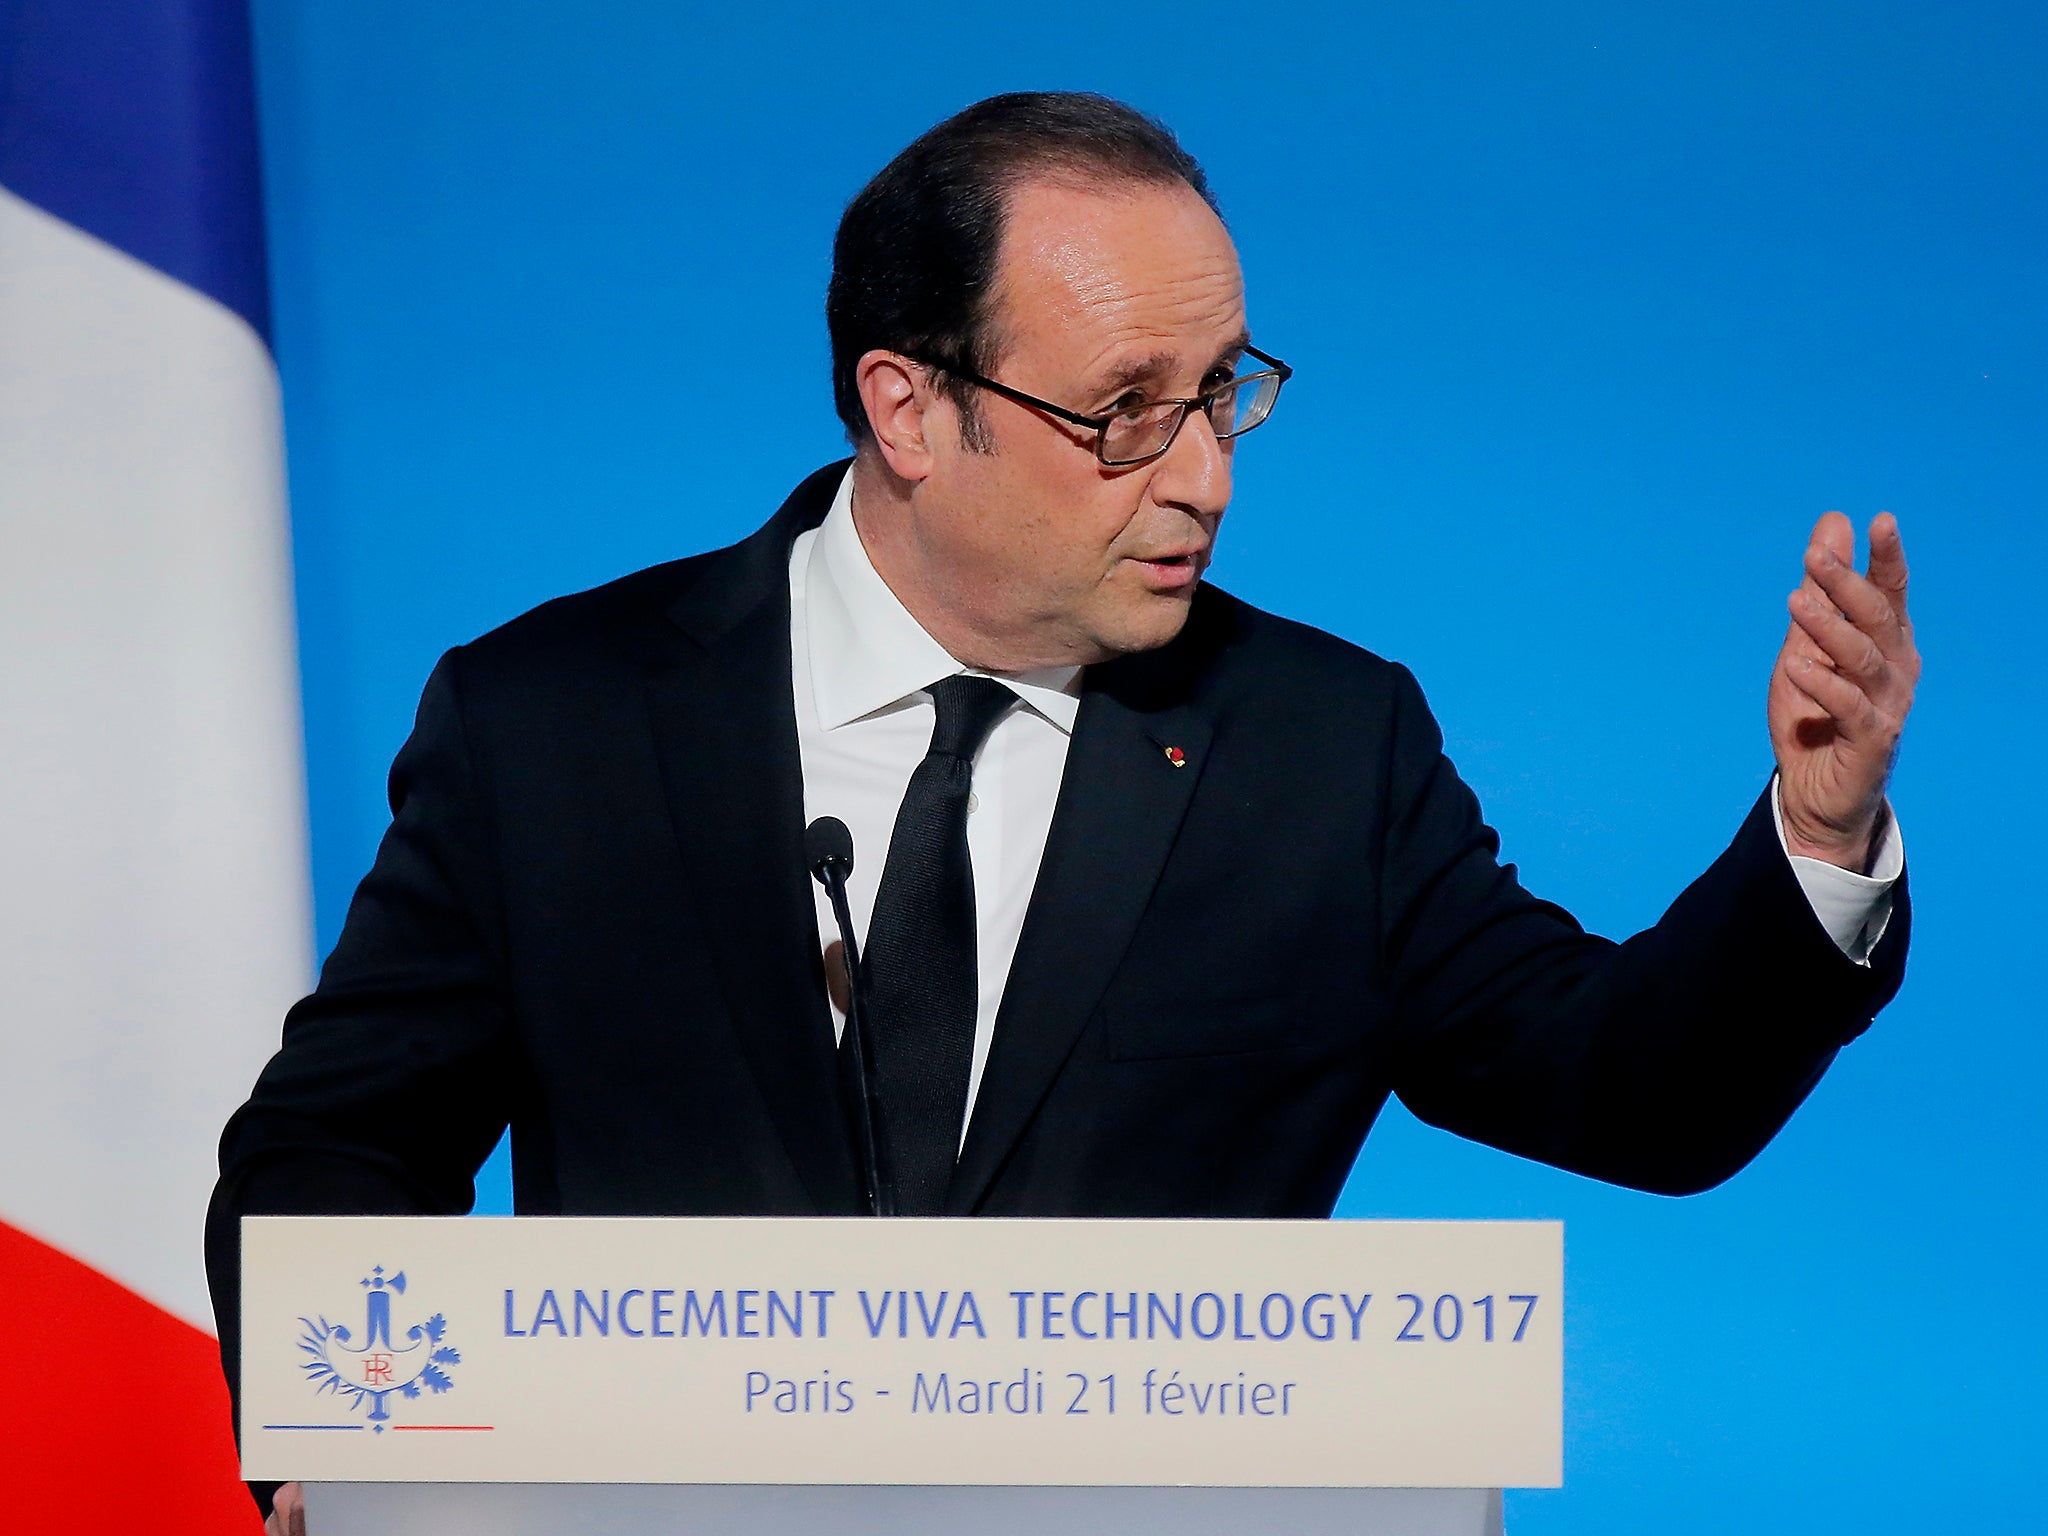 France's President Francois Hollande gestures as he speaks during the global tech conference Viva Technology in Paris at the Elysee Palace in Paris